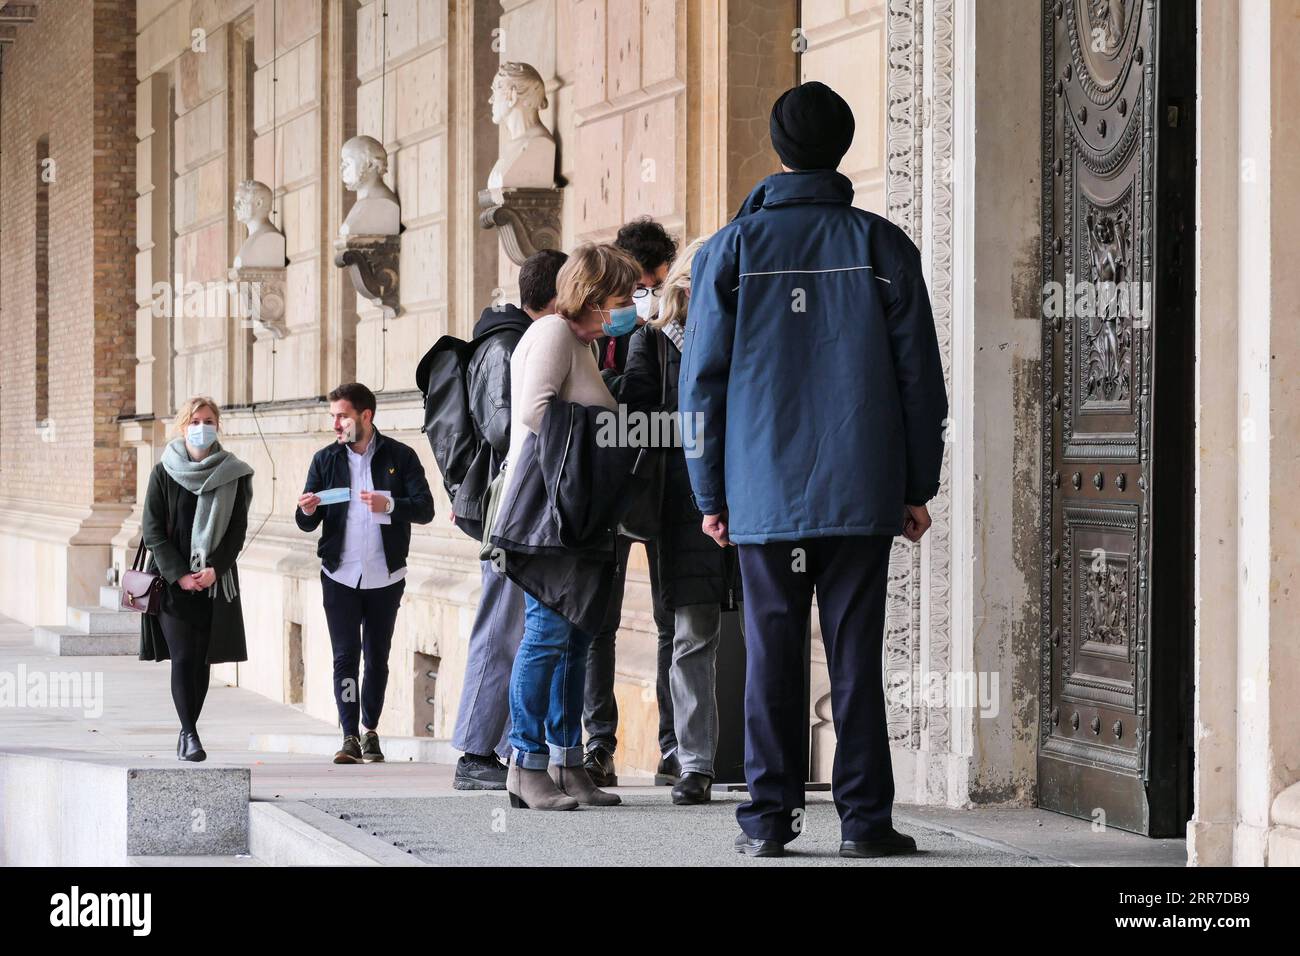 210326 -- BERLIN, March 26, 2021 -- Visitors wait to enter the Neues Museum New Museum in Berlin, capital of Germany, March 25, 2021. Daily COVID-19 infections in Germany rose sharply as 22,657 new cases were registered within one day, about 5,100 more than one week ago, the Robert Koch Institute RKI said Thursday. The country s seven-day COVID-19 incidence rate also rose from 108.1 per 100,000 people in the previous day to 113.3 Thursday, according to the federal government agency for disease control and prevention. Photo by /Xinhua GERMANY-BERLIN-COVID-19-CASES StefanxZeitz PUBLICATIONxNOTxI Stock Photo